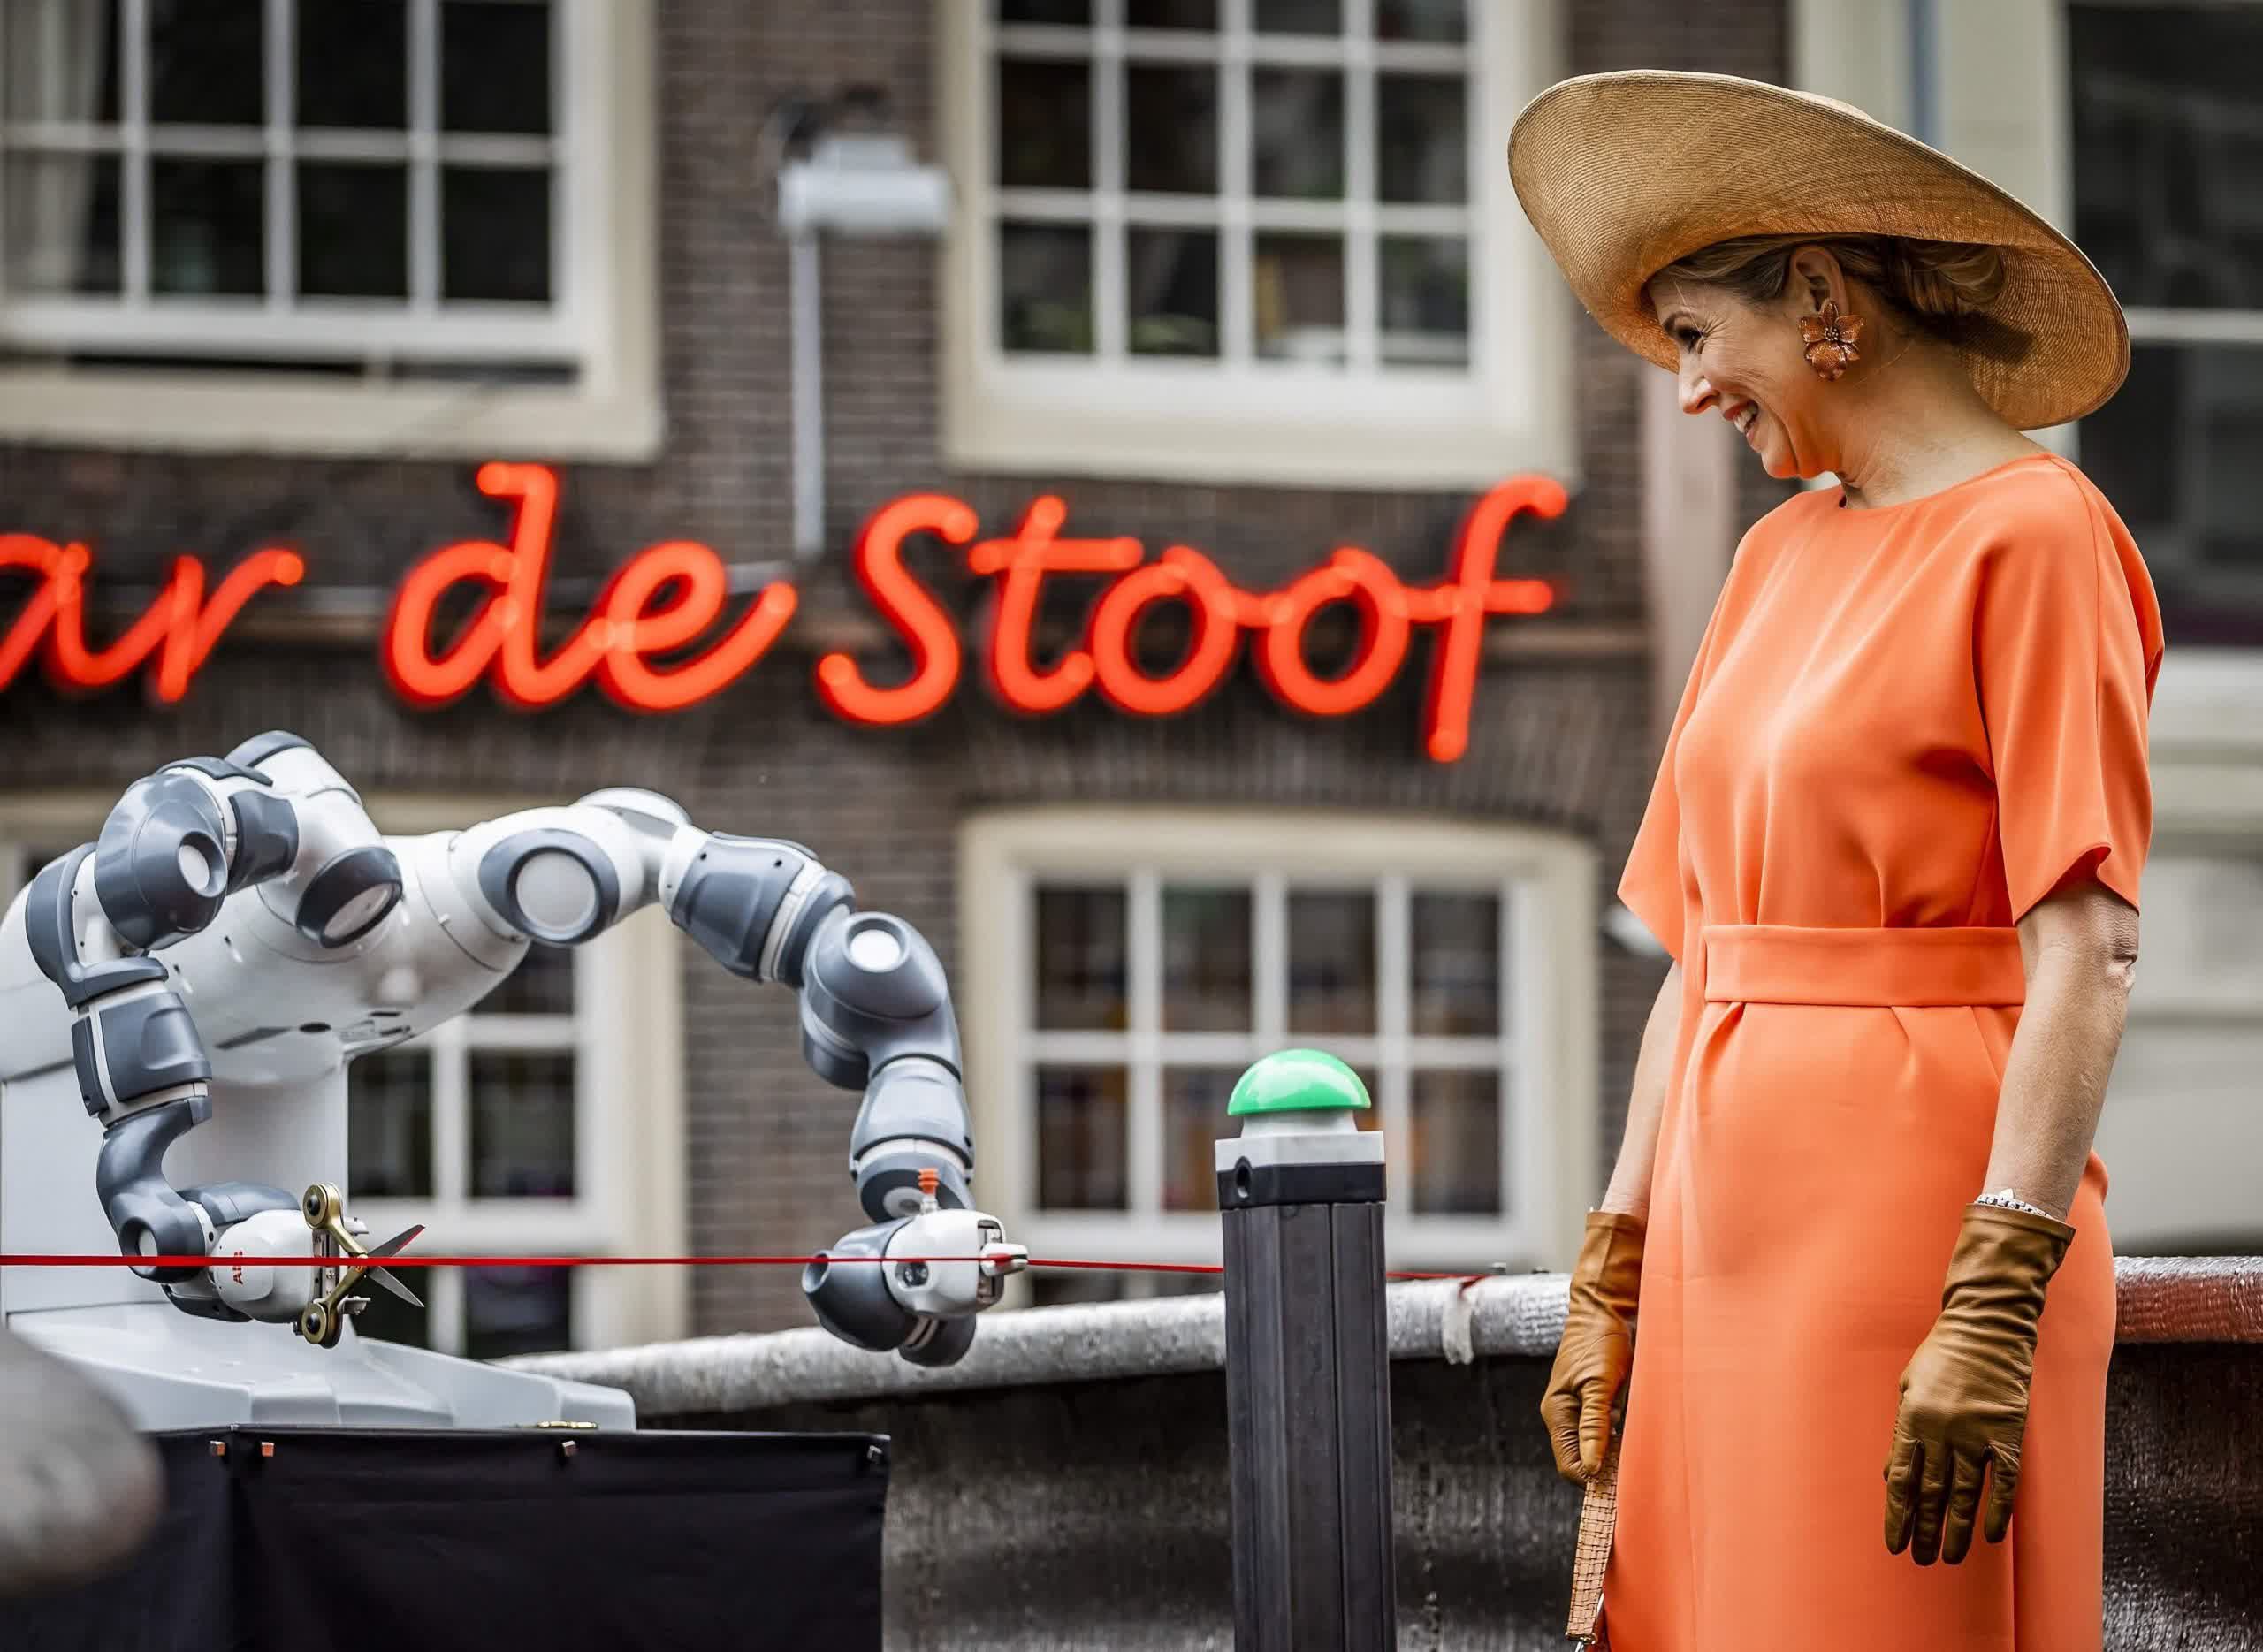 3D-printed bridge in red light district opened by Dutch Queen with robot arm